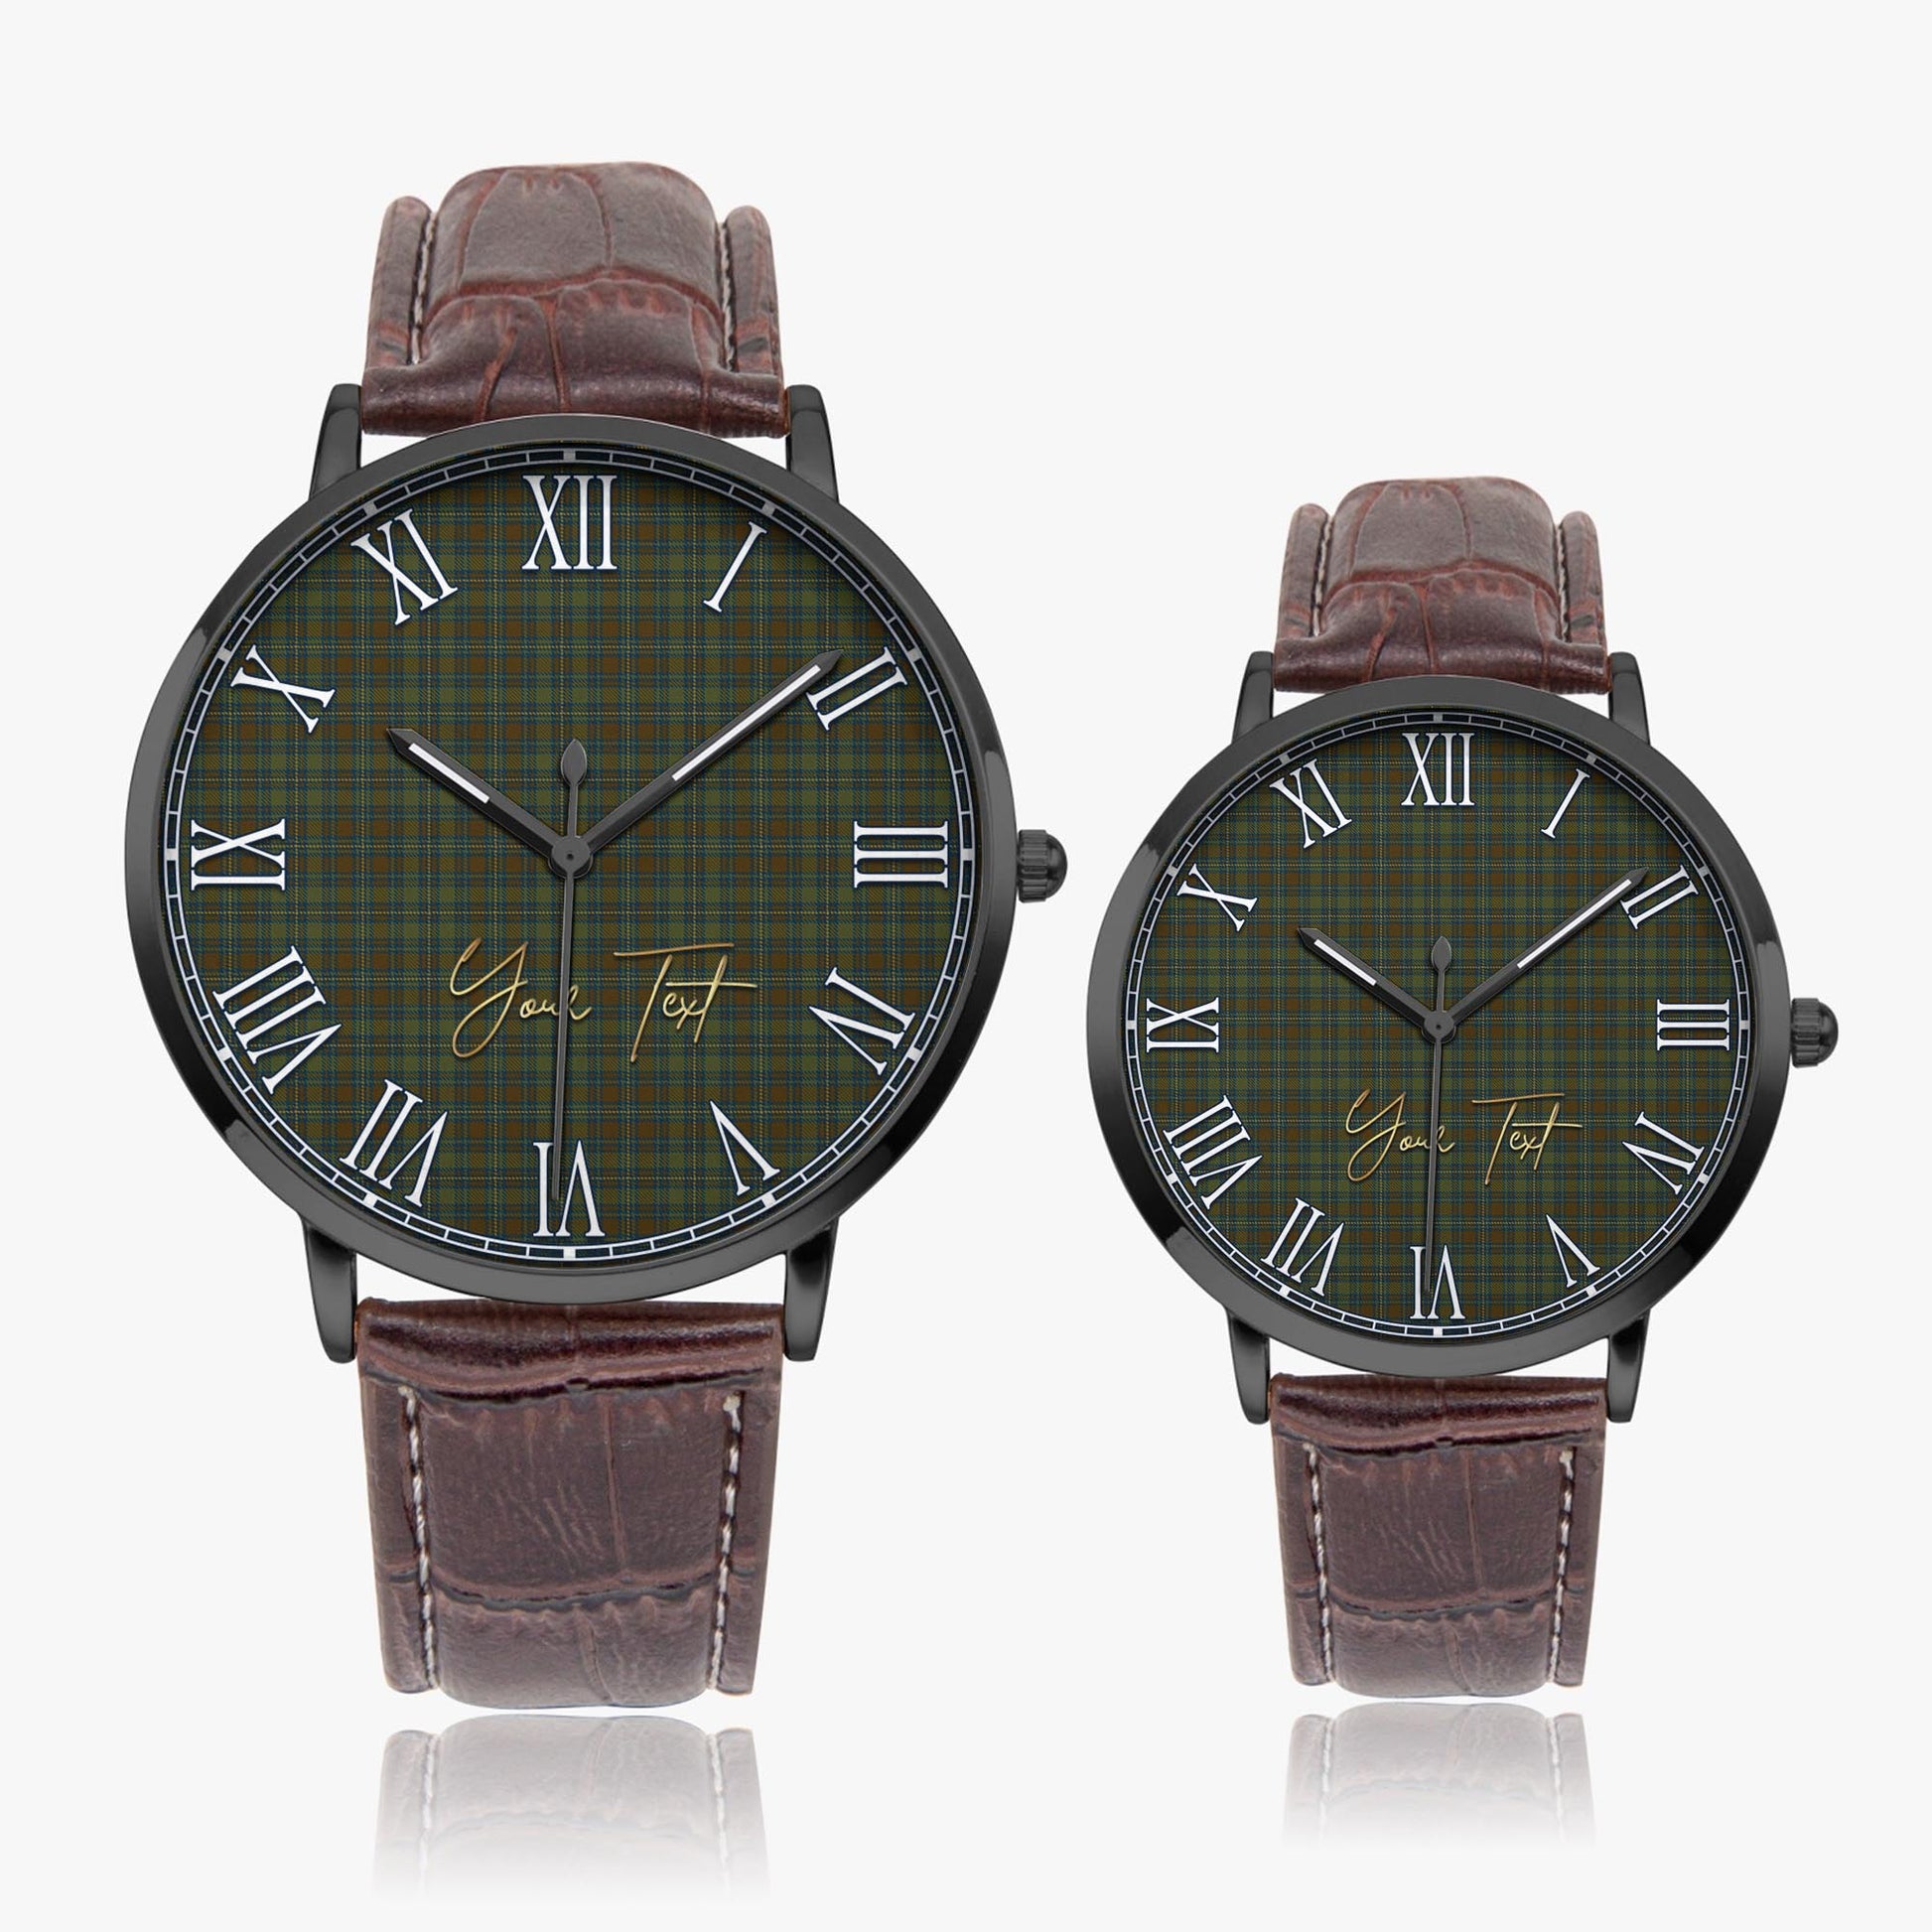 Kerry County Ireland Tartan Personalized Your Text Leather Trap Quartz Watch Ultra Thin Black Case With Brown Leather Strap - Tartanvibesclothing